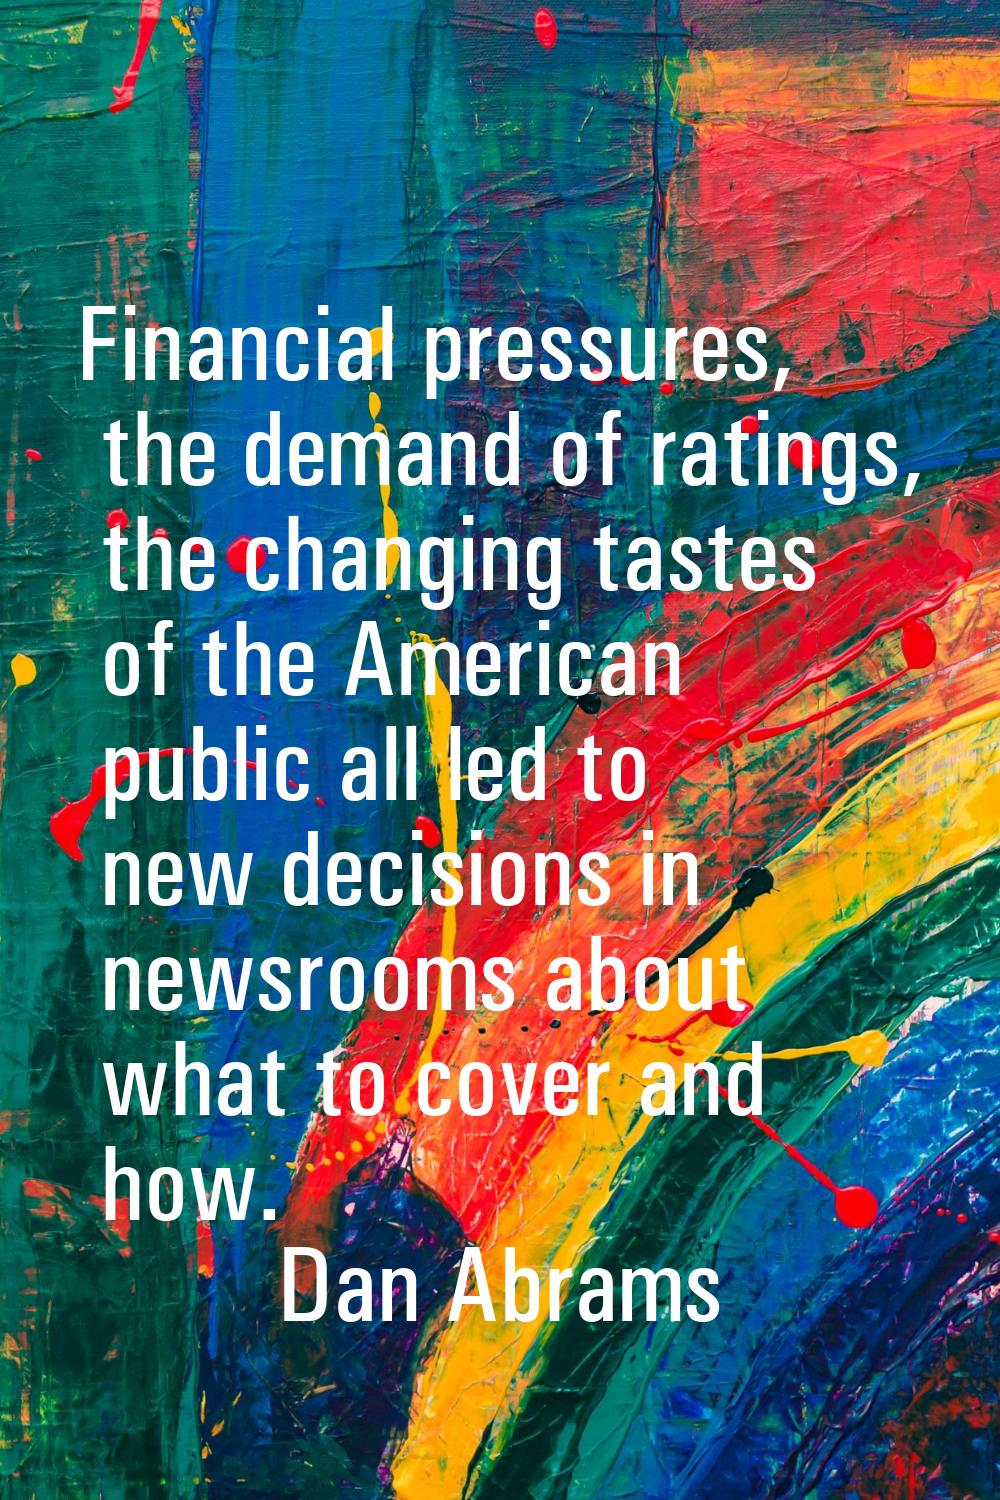 Financial pressures, the demand of ratings, the changing tastes of the American public all led to n